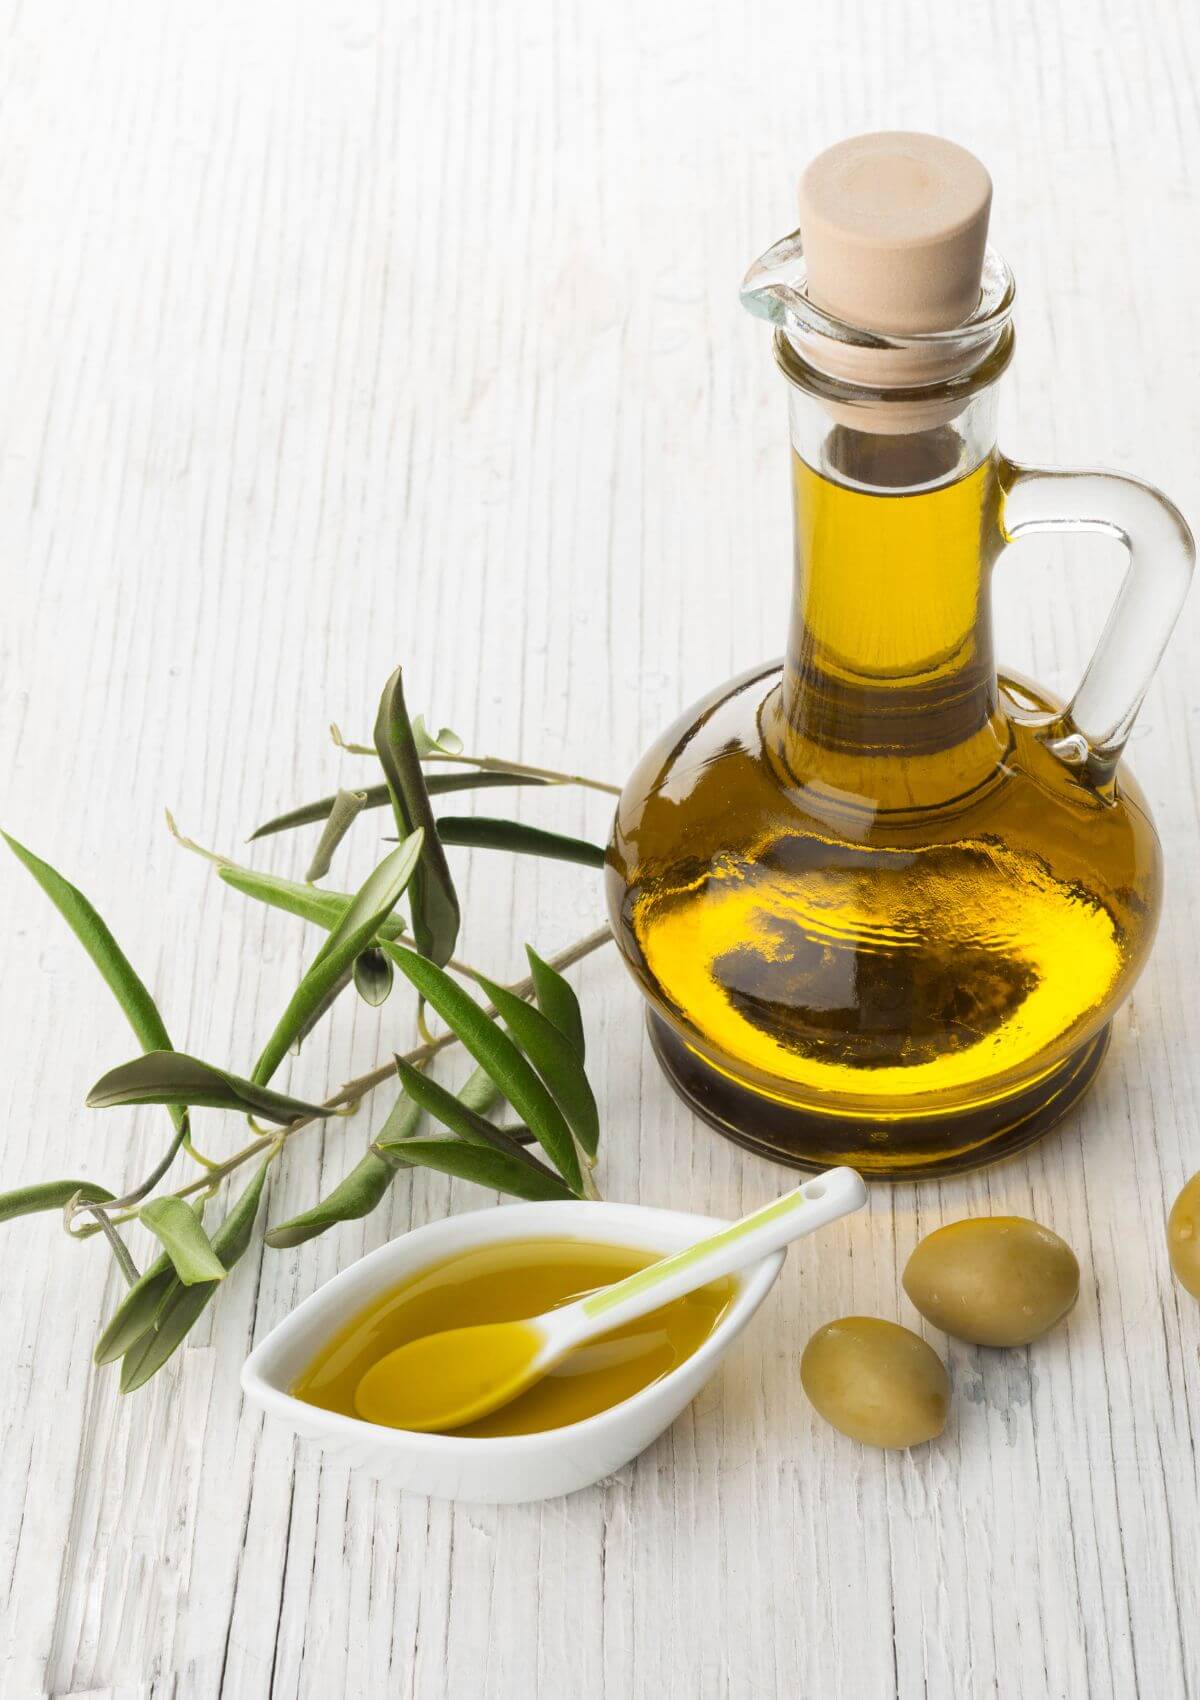 Olive oil - a tasty souvenir from Greece